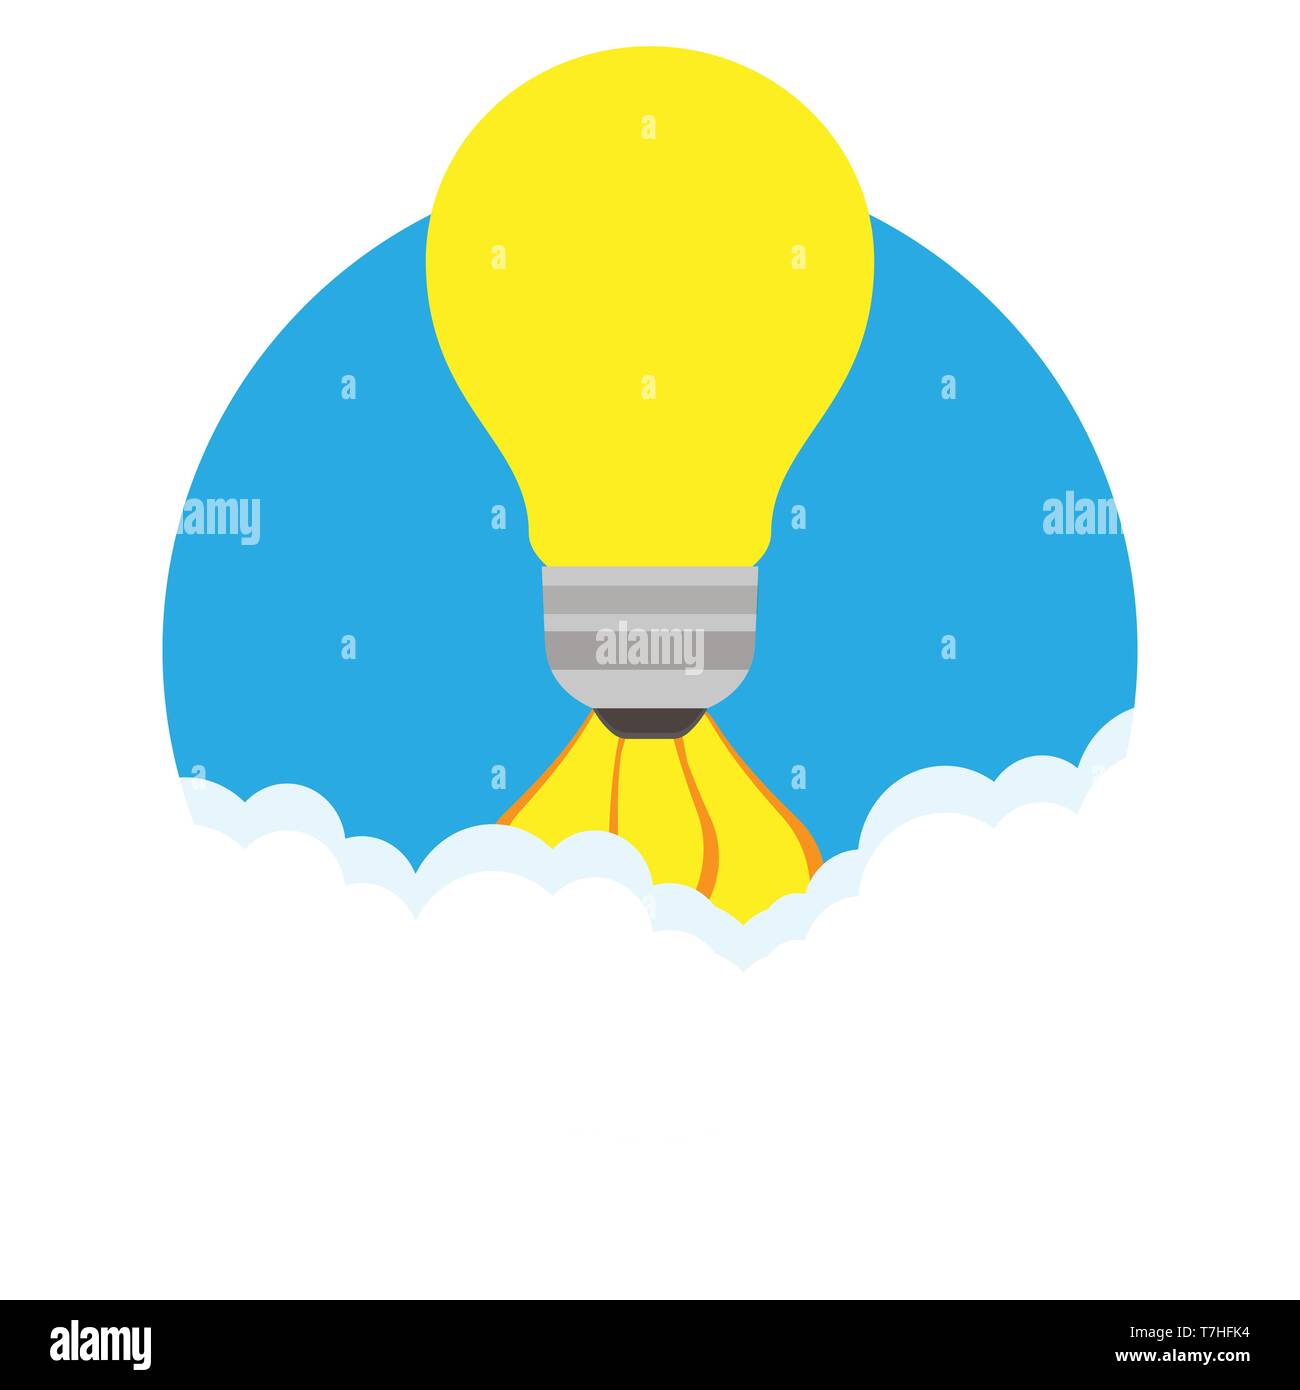 Find right idea cartoon management recruitment training riddle. Select employer interview promotion ideal. Professional hiring agency staff. Business  Stock Vector